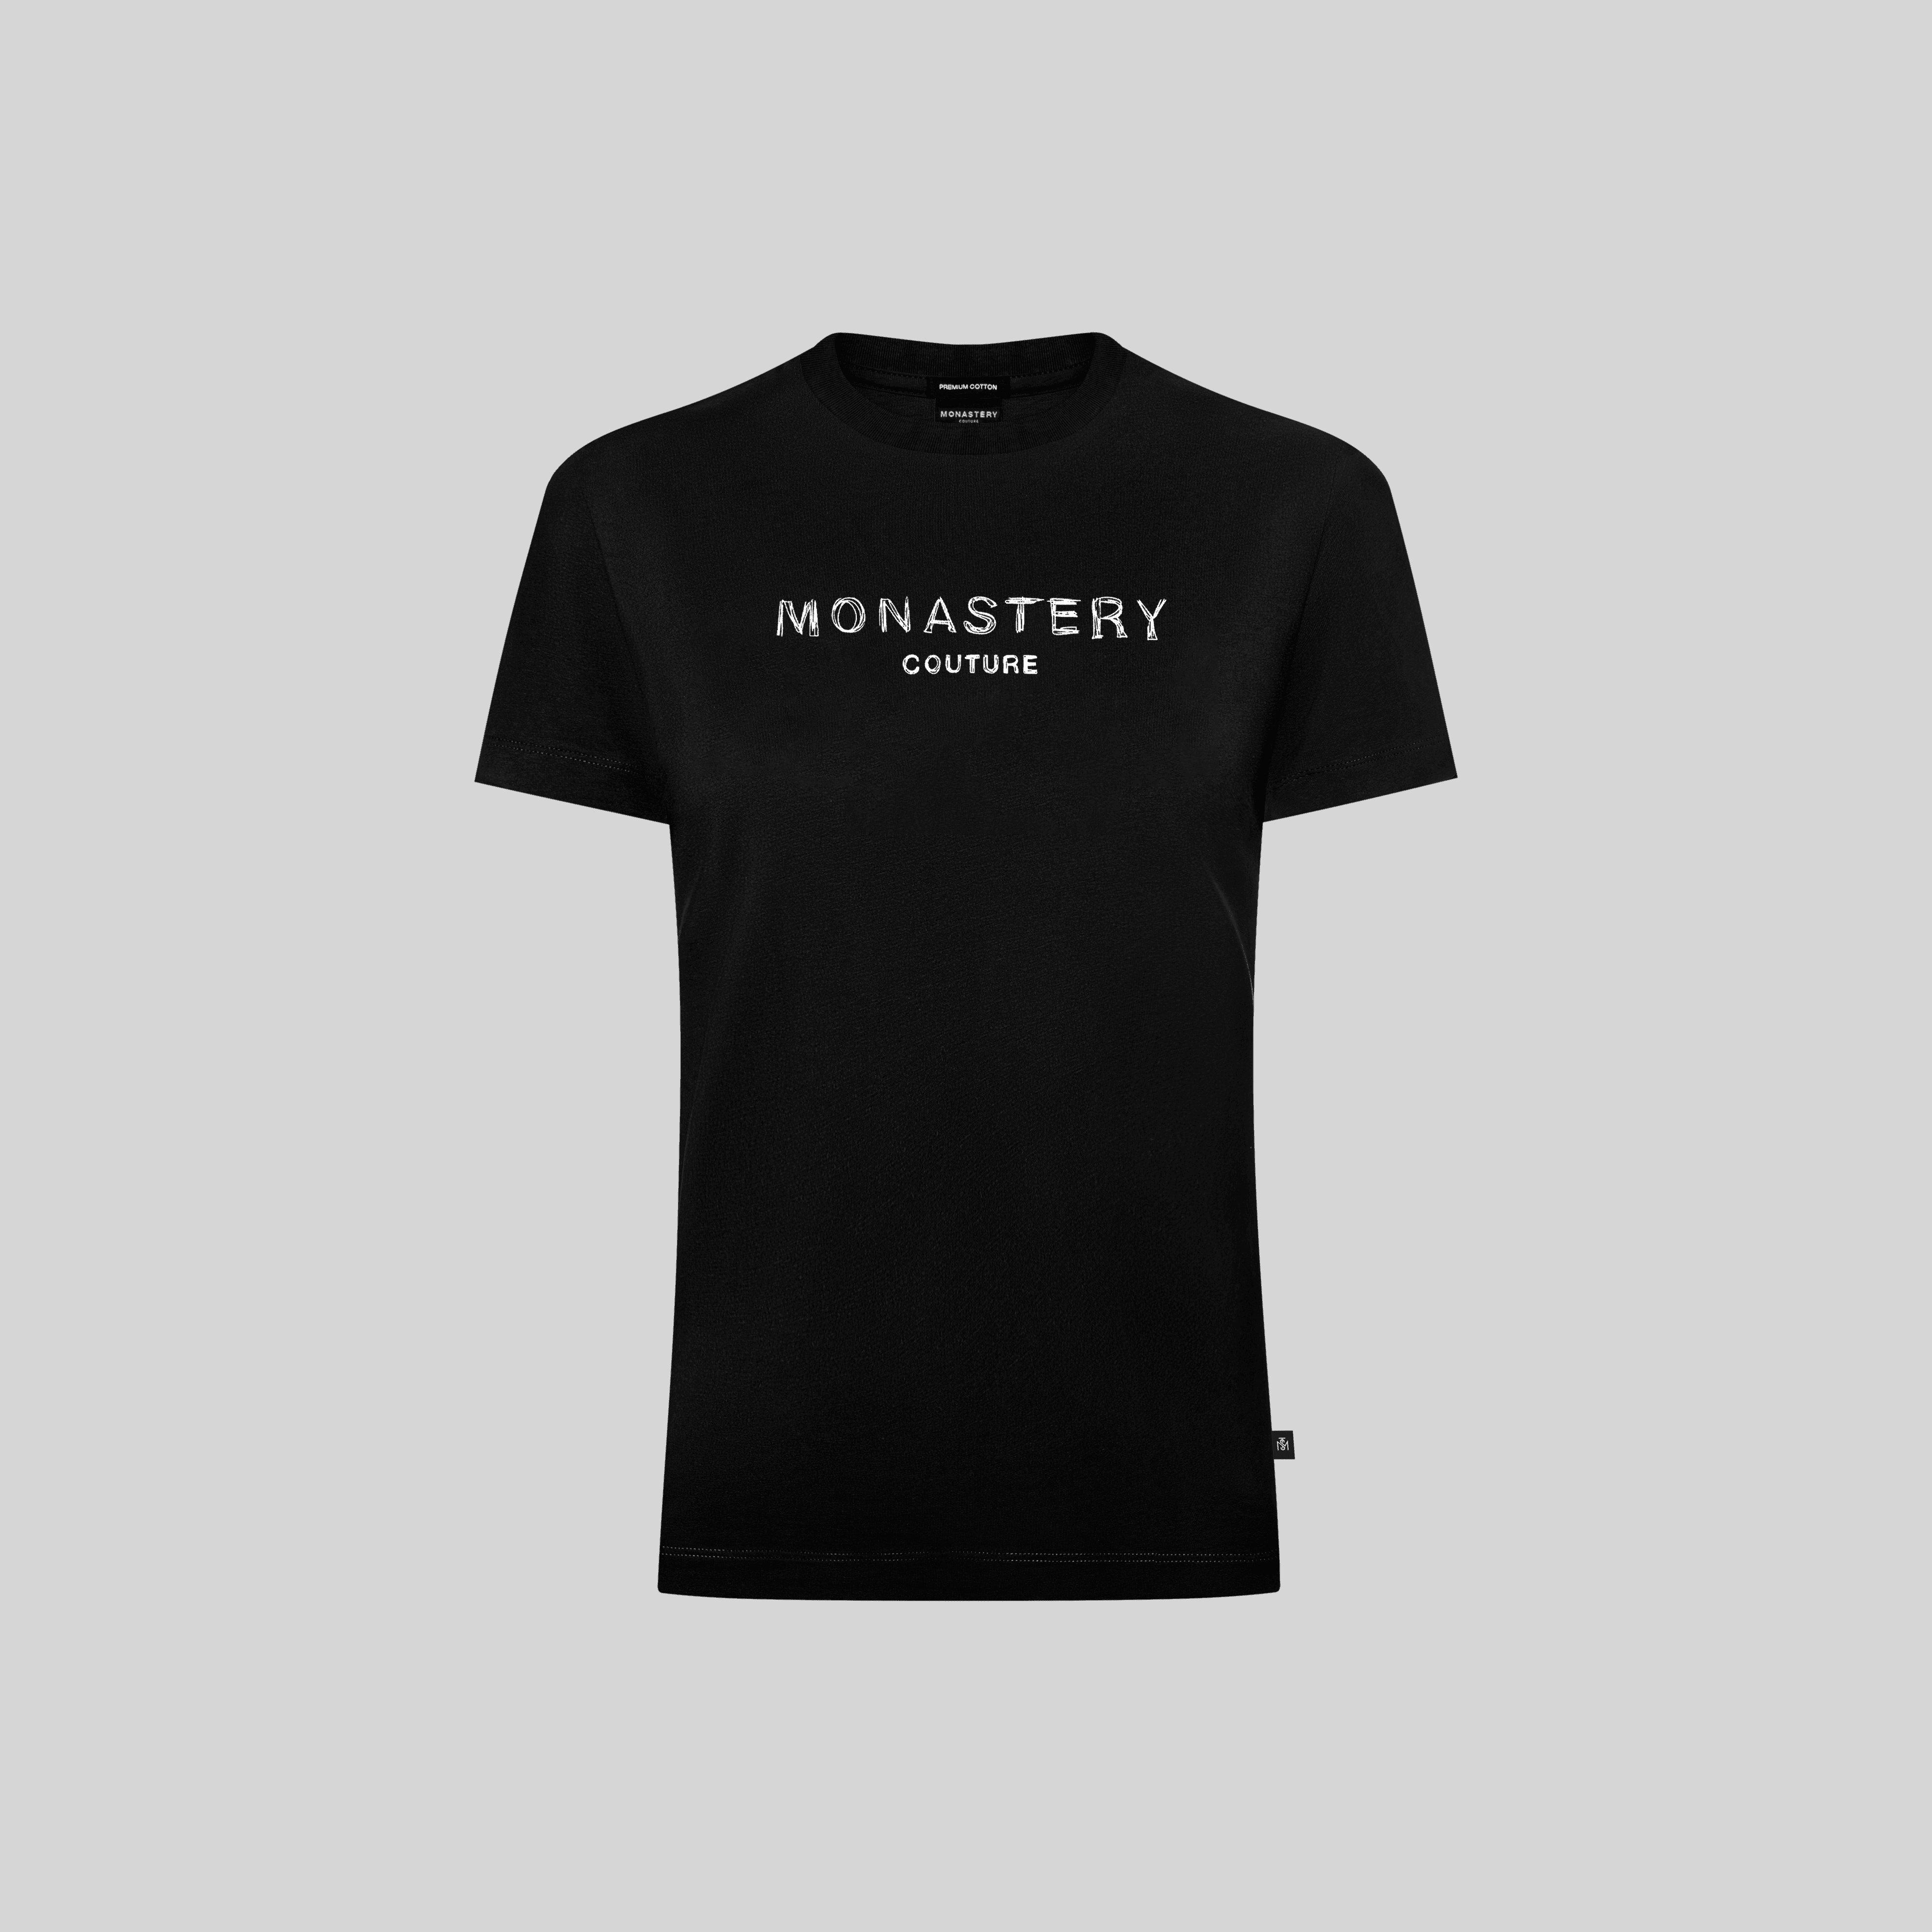 KOINÉ BLACK T-SHIRT | Monastery Couture